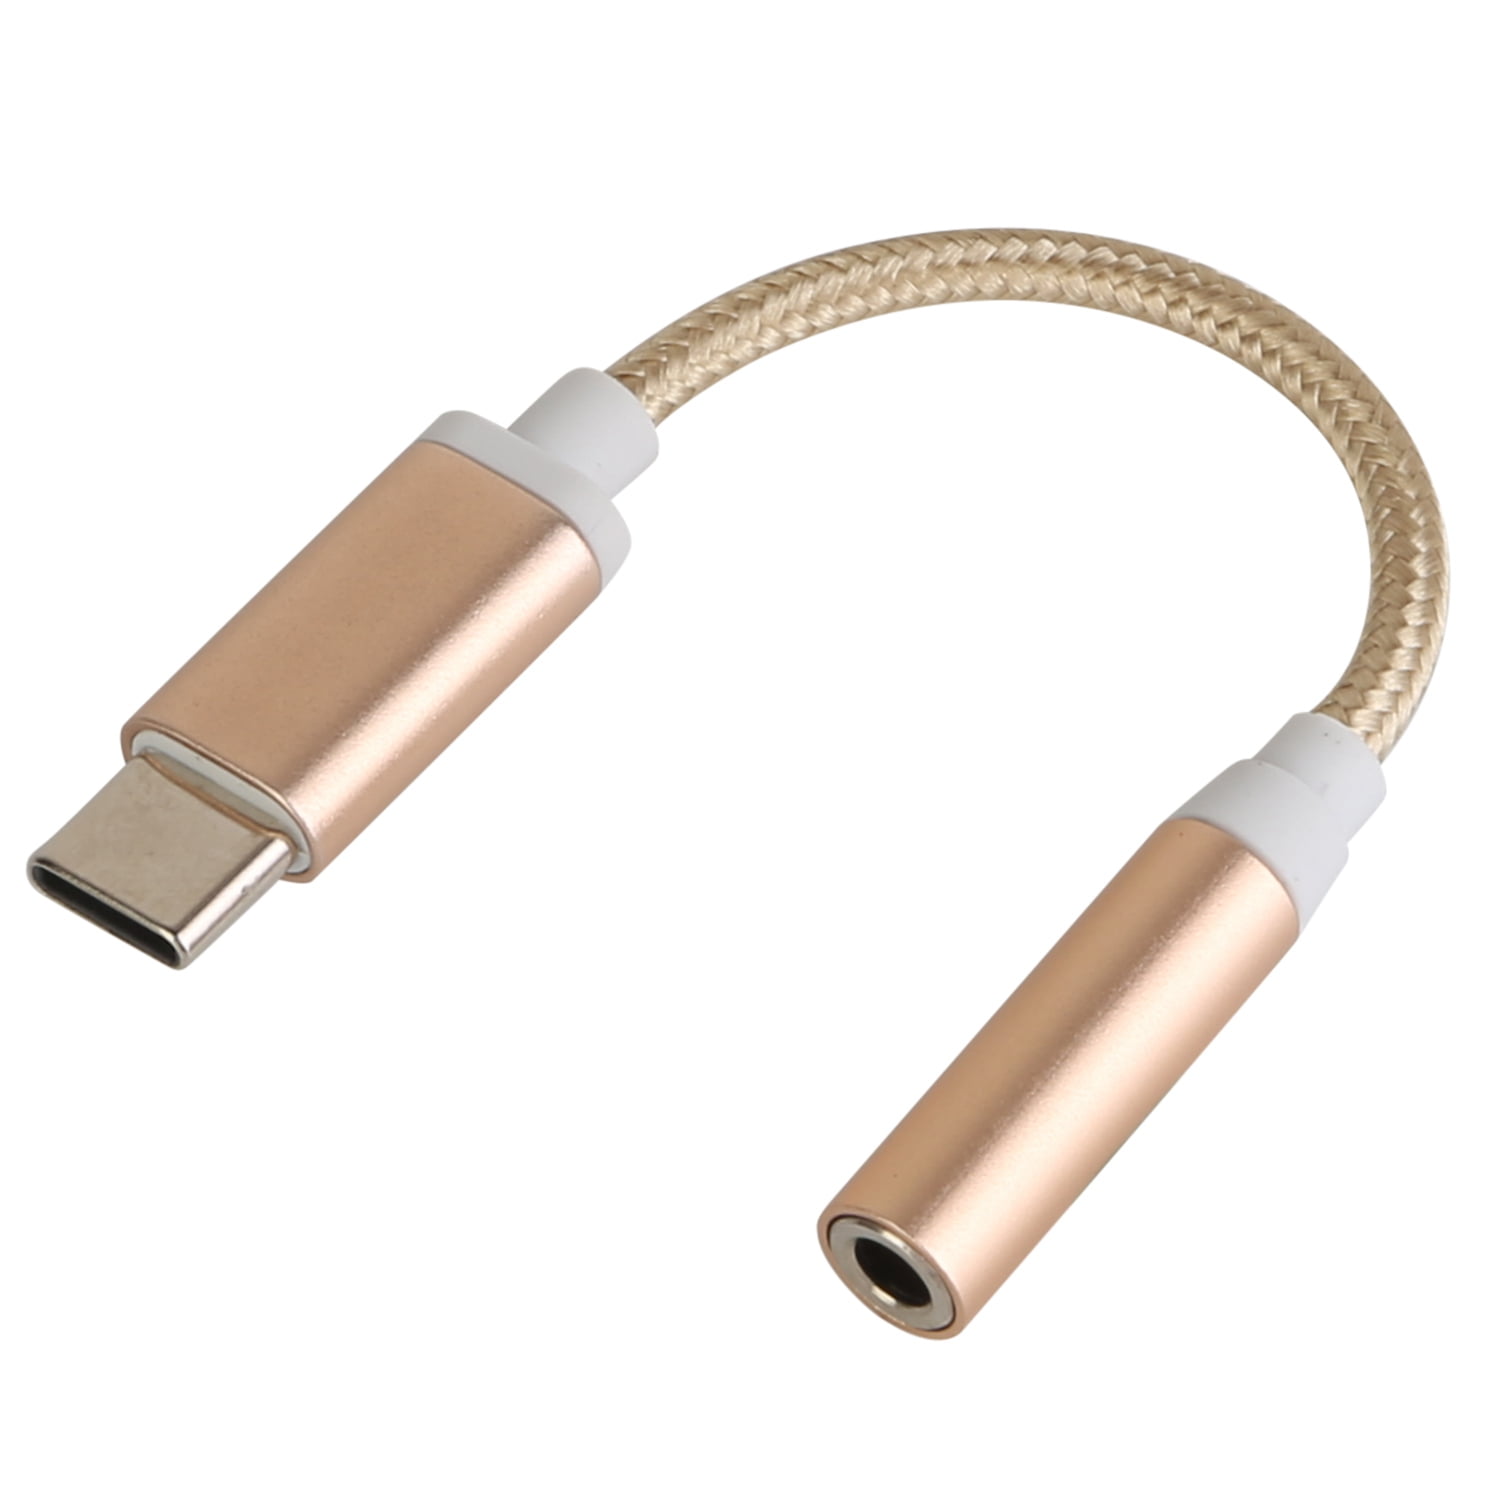 USB C to 3.5mm Aux Cord for Car with Charging 4FT,2-in-1 USB